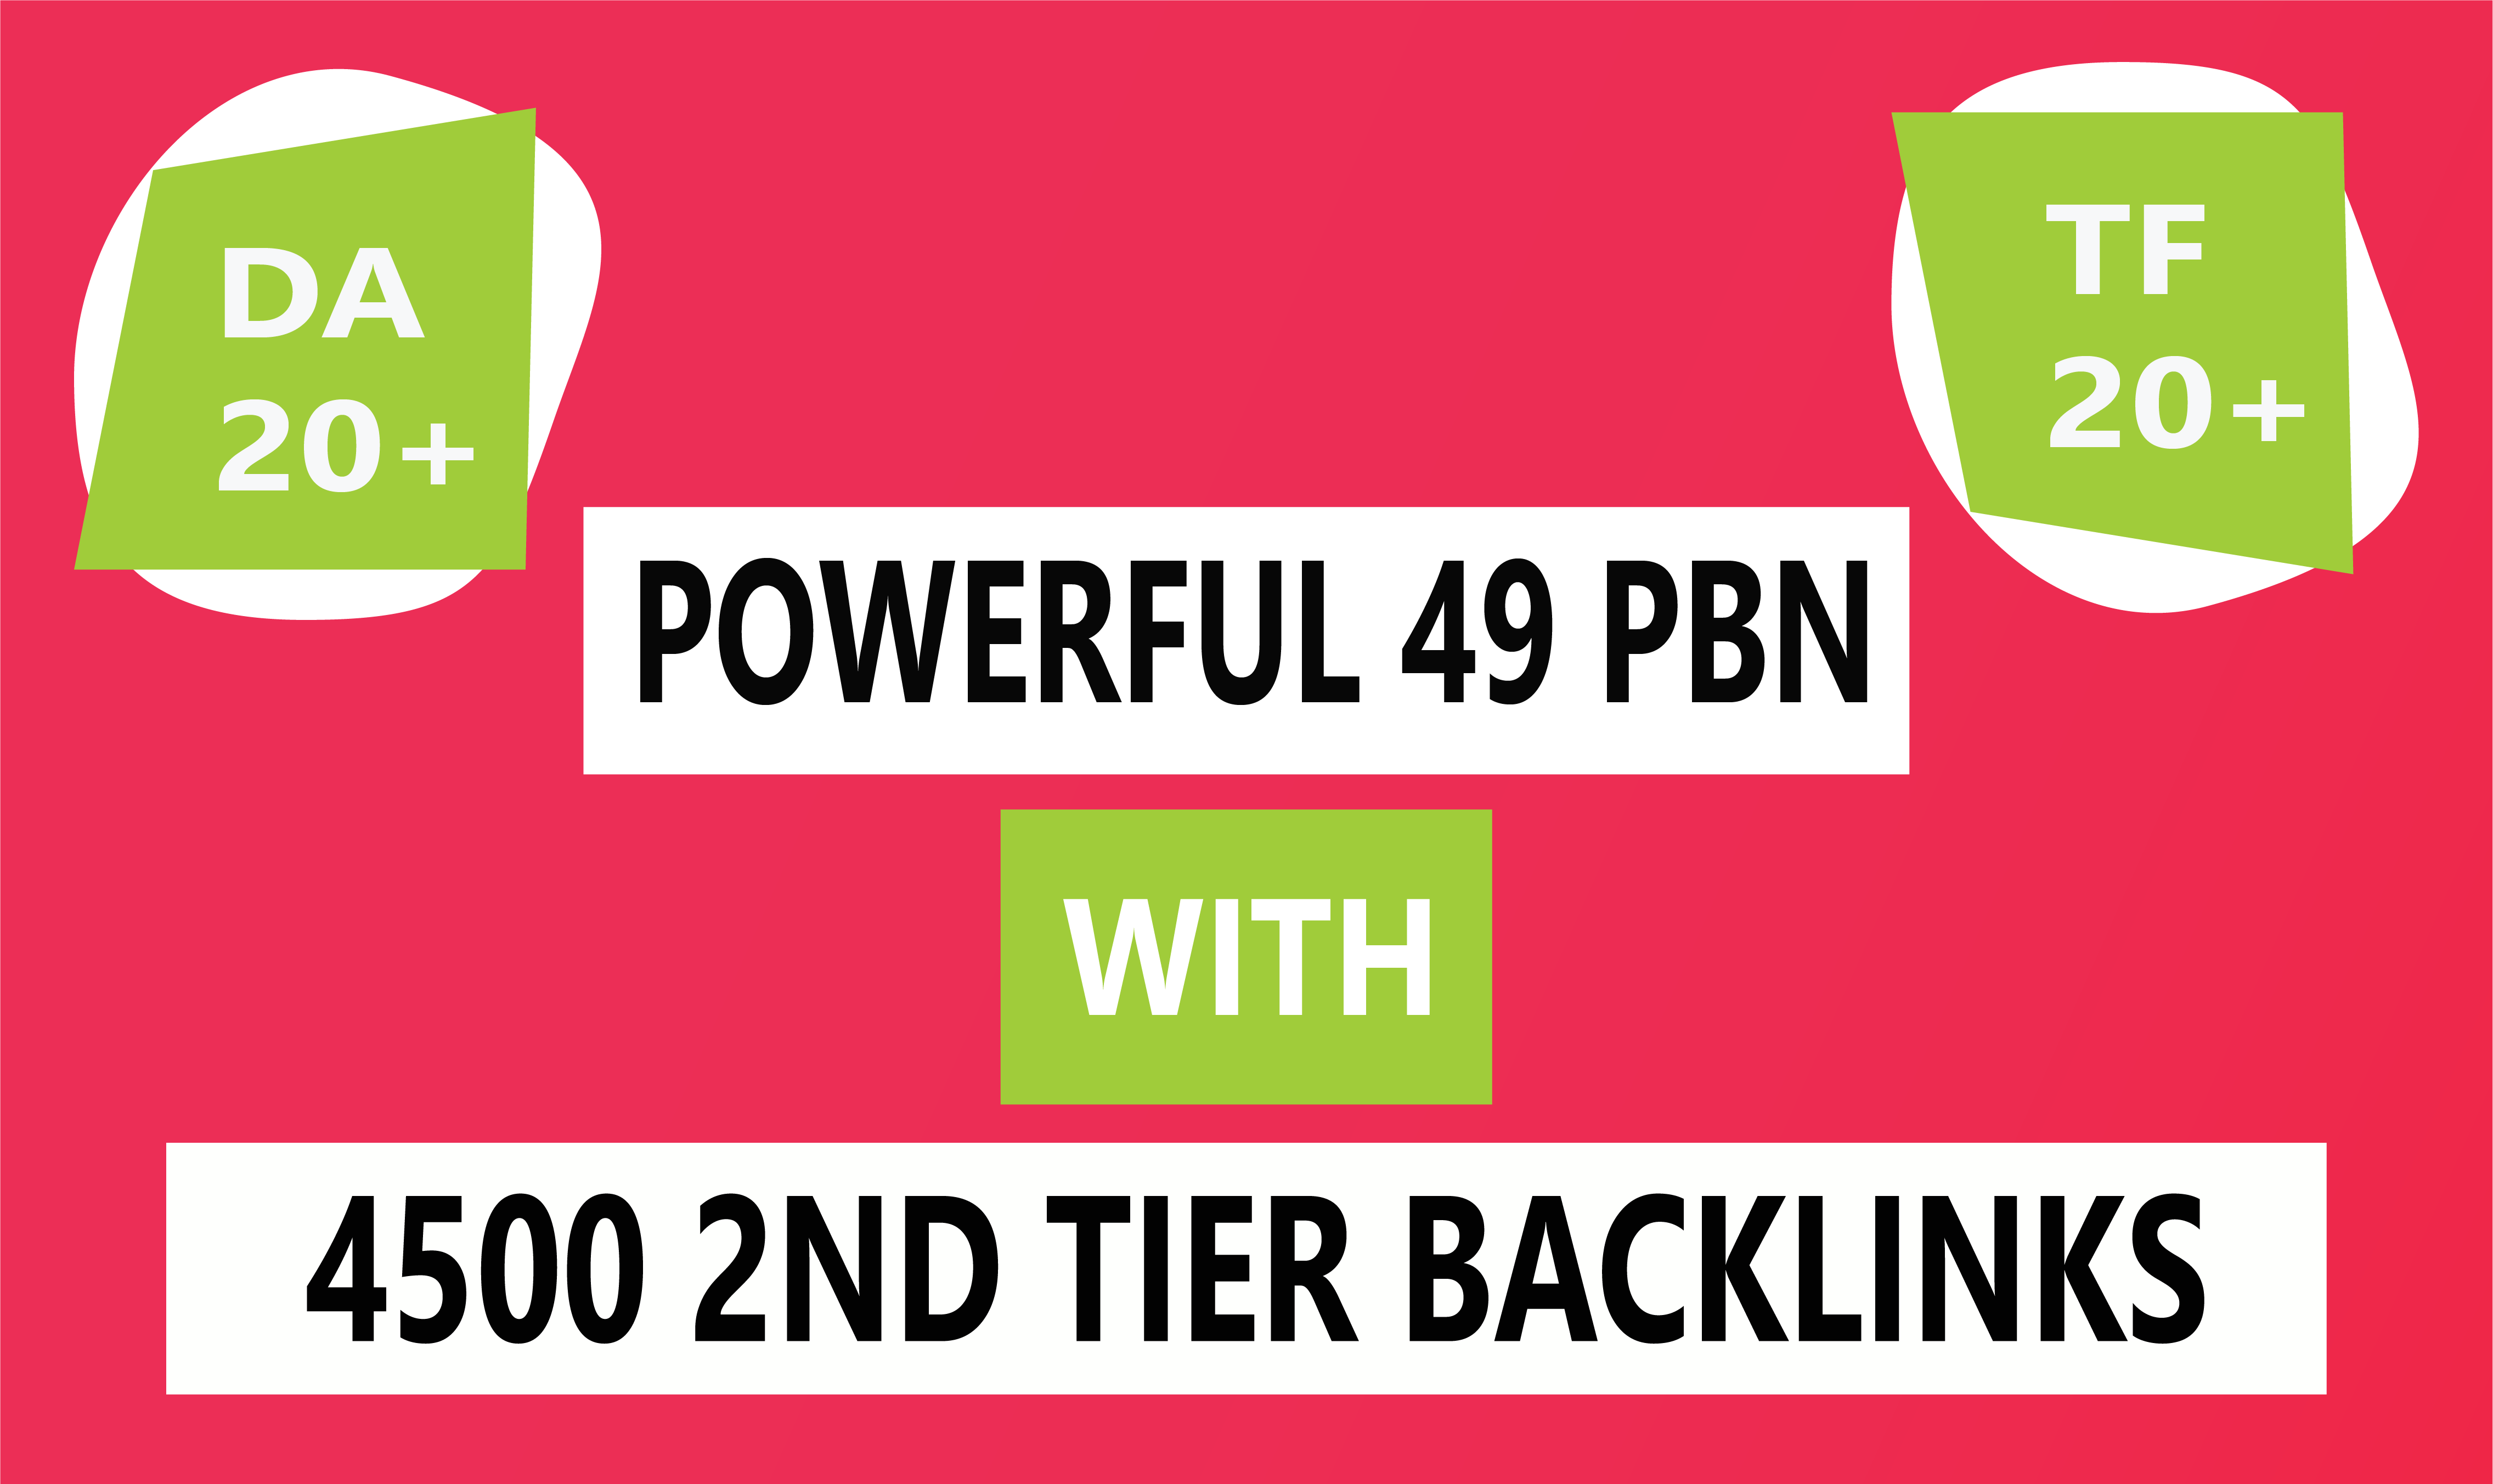 2021 Powerful 49 Homepage Dofollow PBN With 4500 2nd Tier Contextual Backlinks